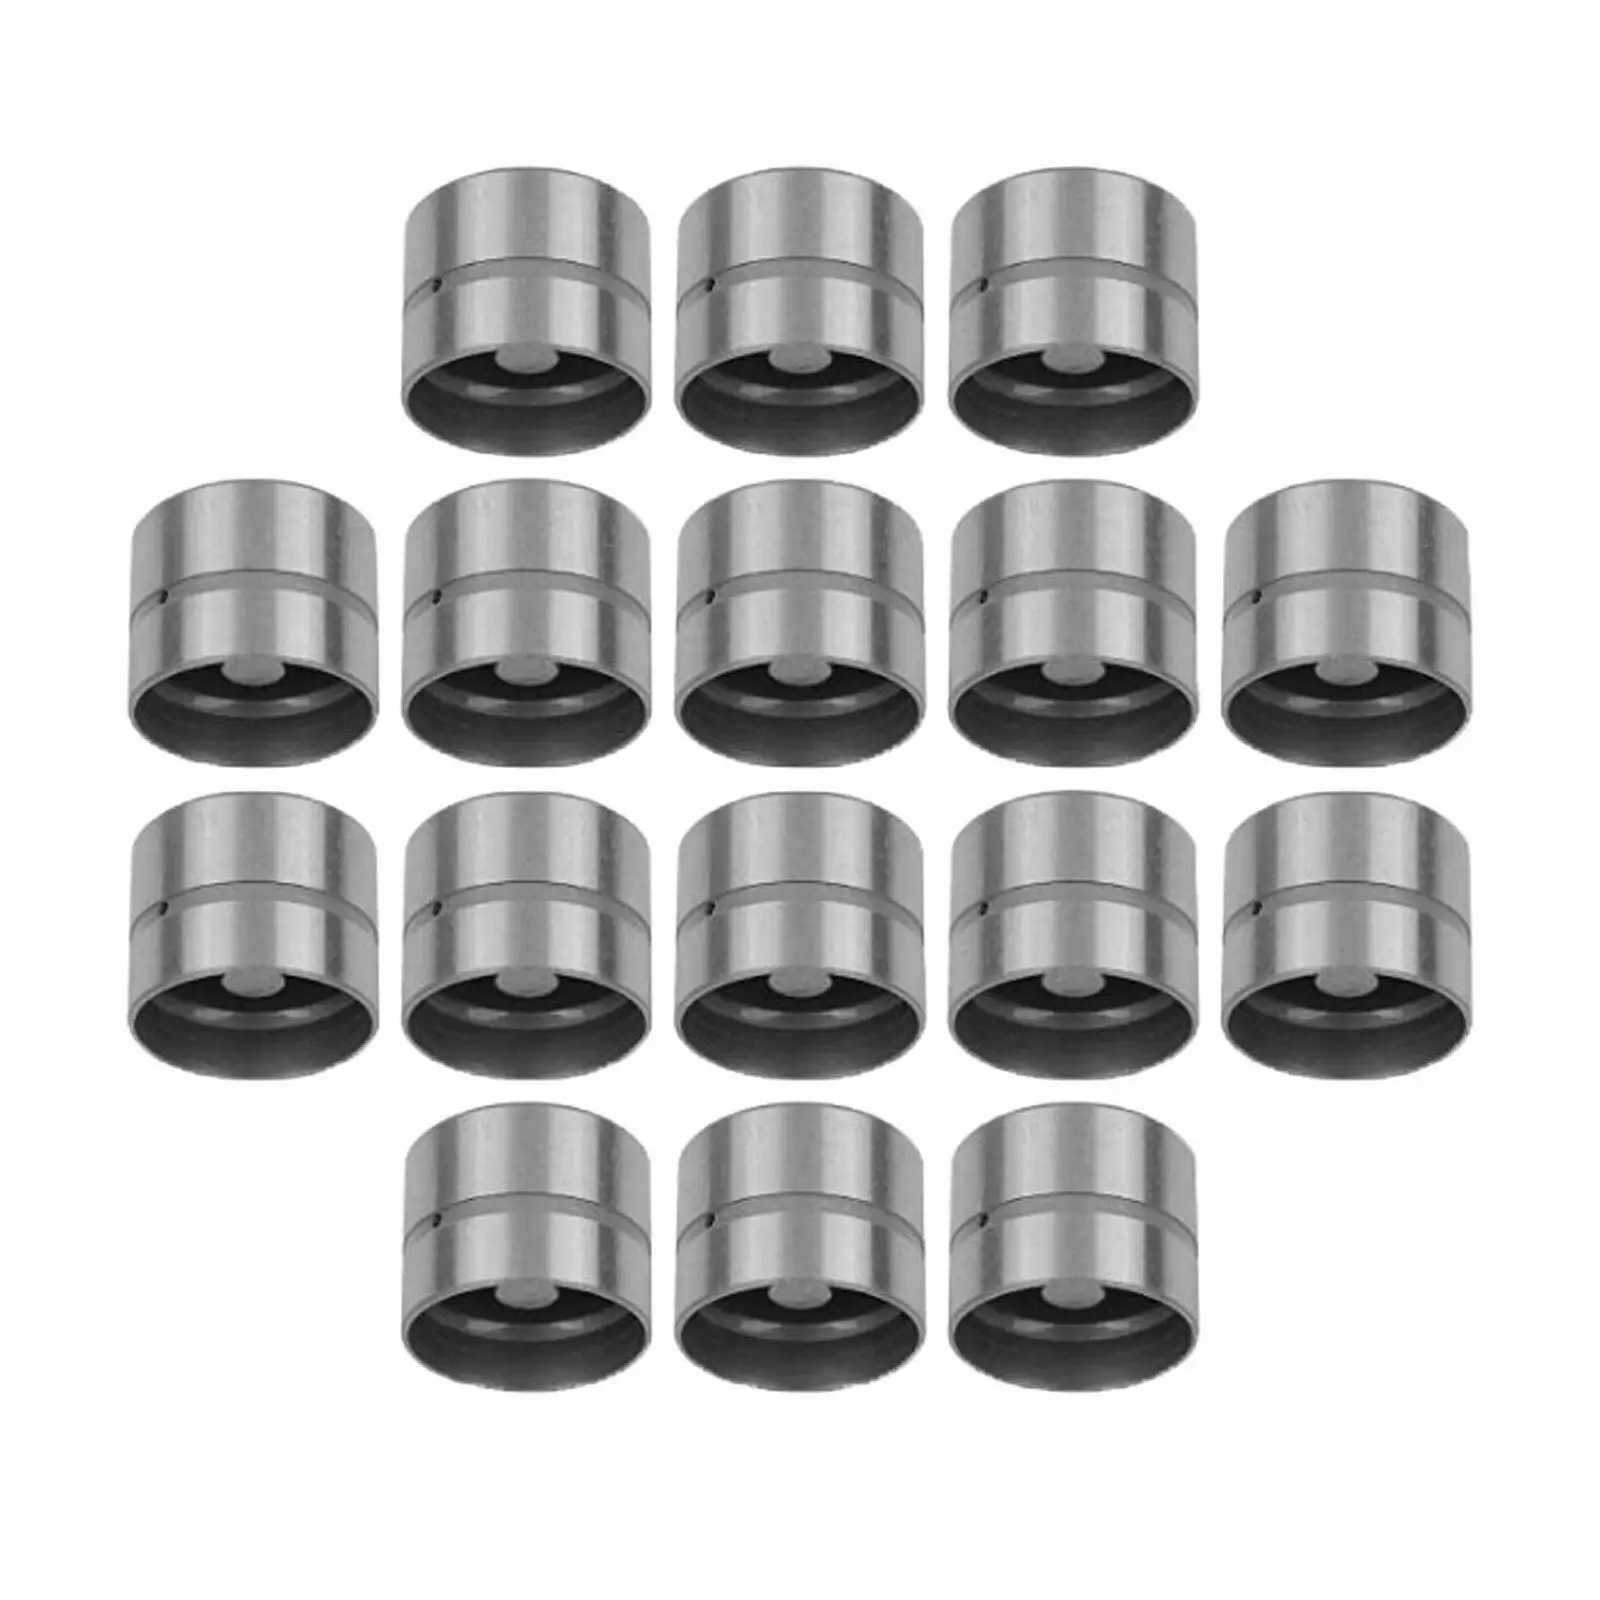 16 Pieces Hydraulic Lifters Tappets Spare Parts Replacement Valves Parts Engine for 20XE C20XE C20Let x20Xev 420011810